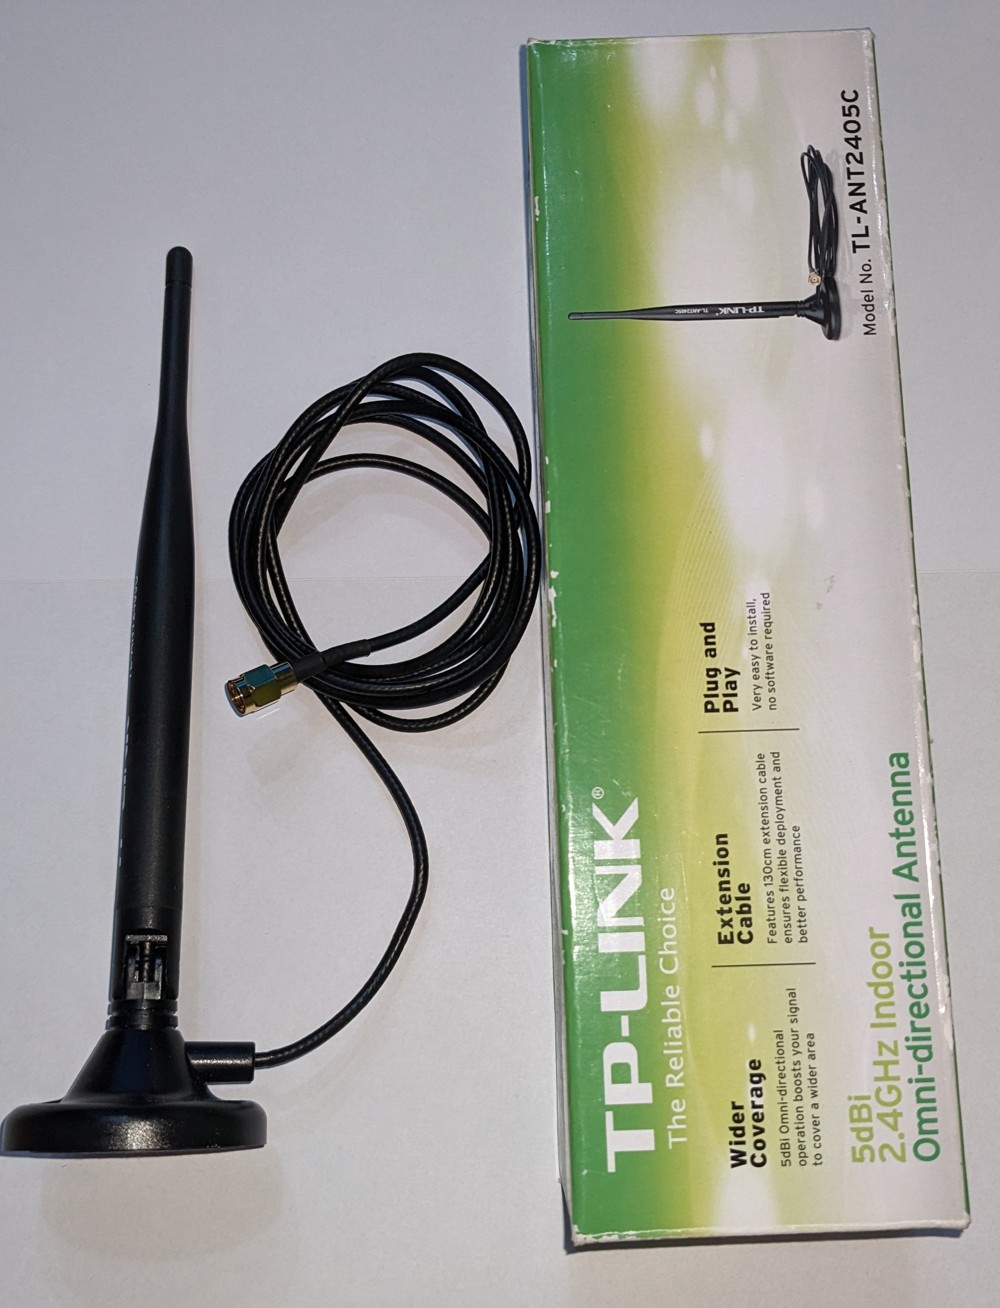 TP-Link Omni-directional Antenna -TL-ANT2405C - WLAN Antenne  